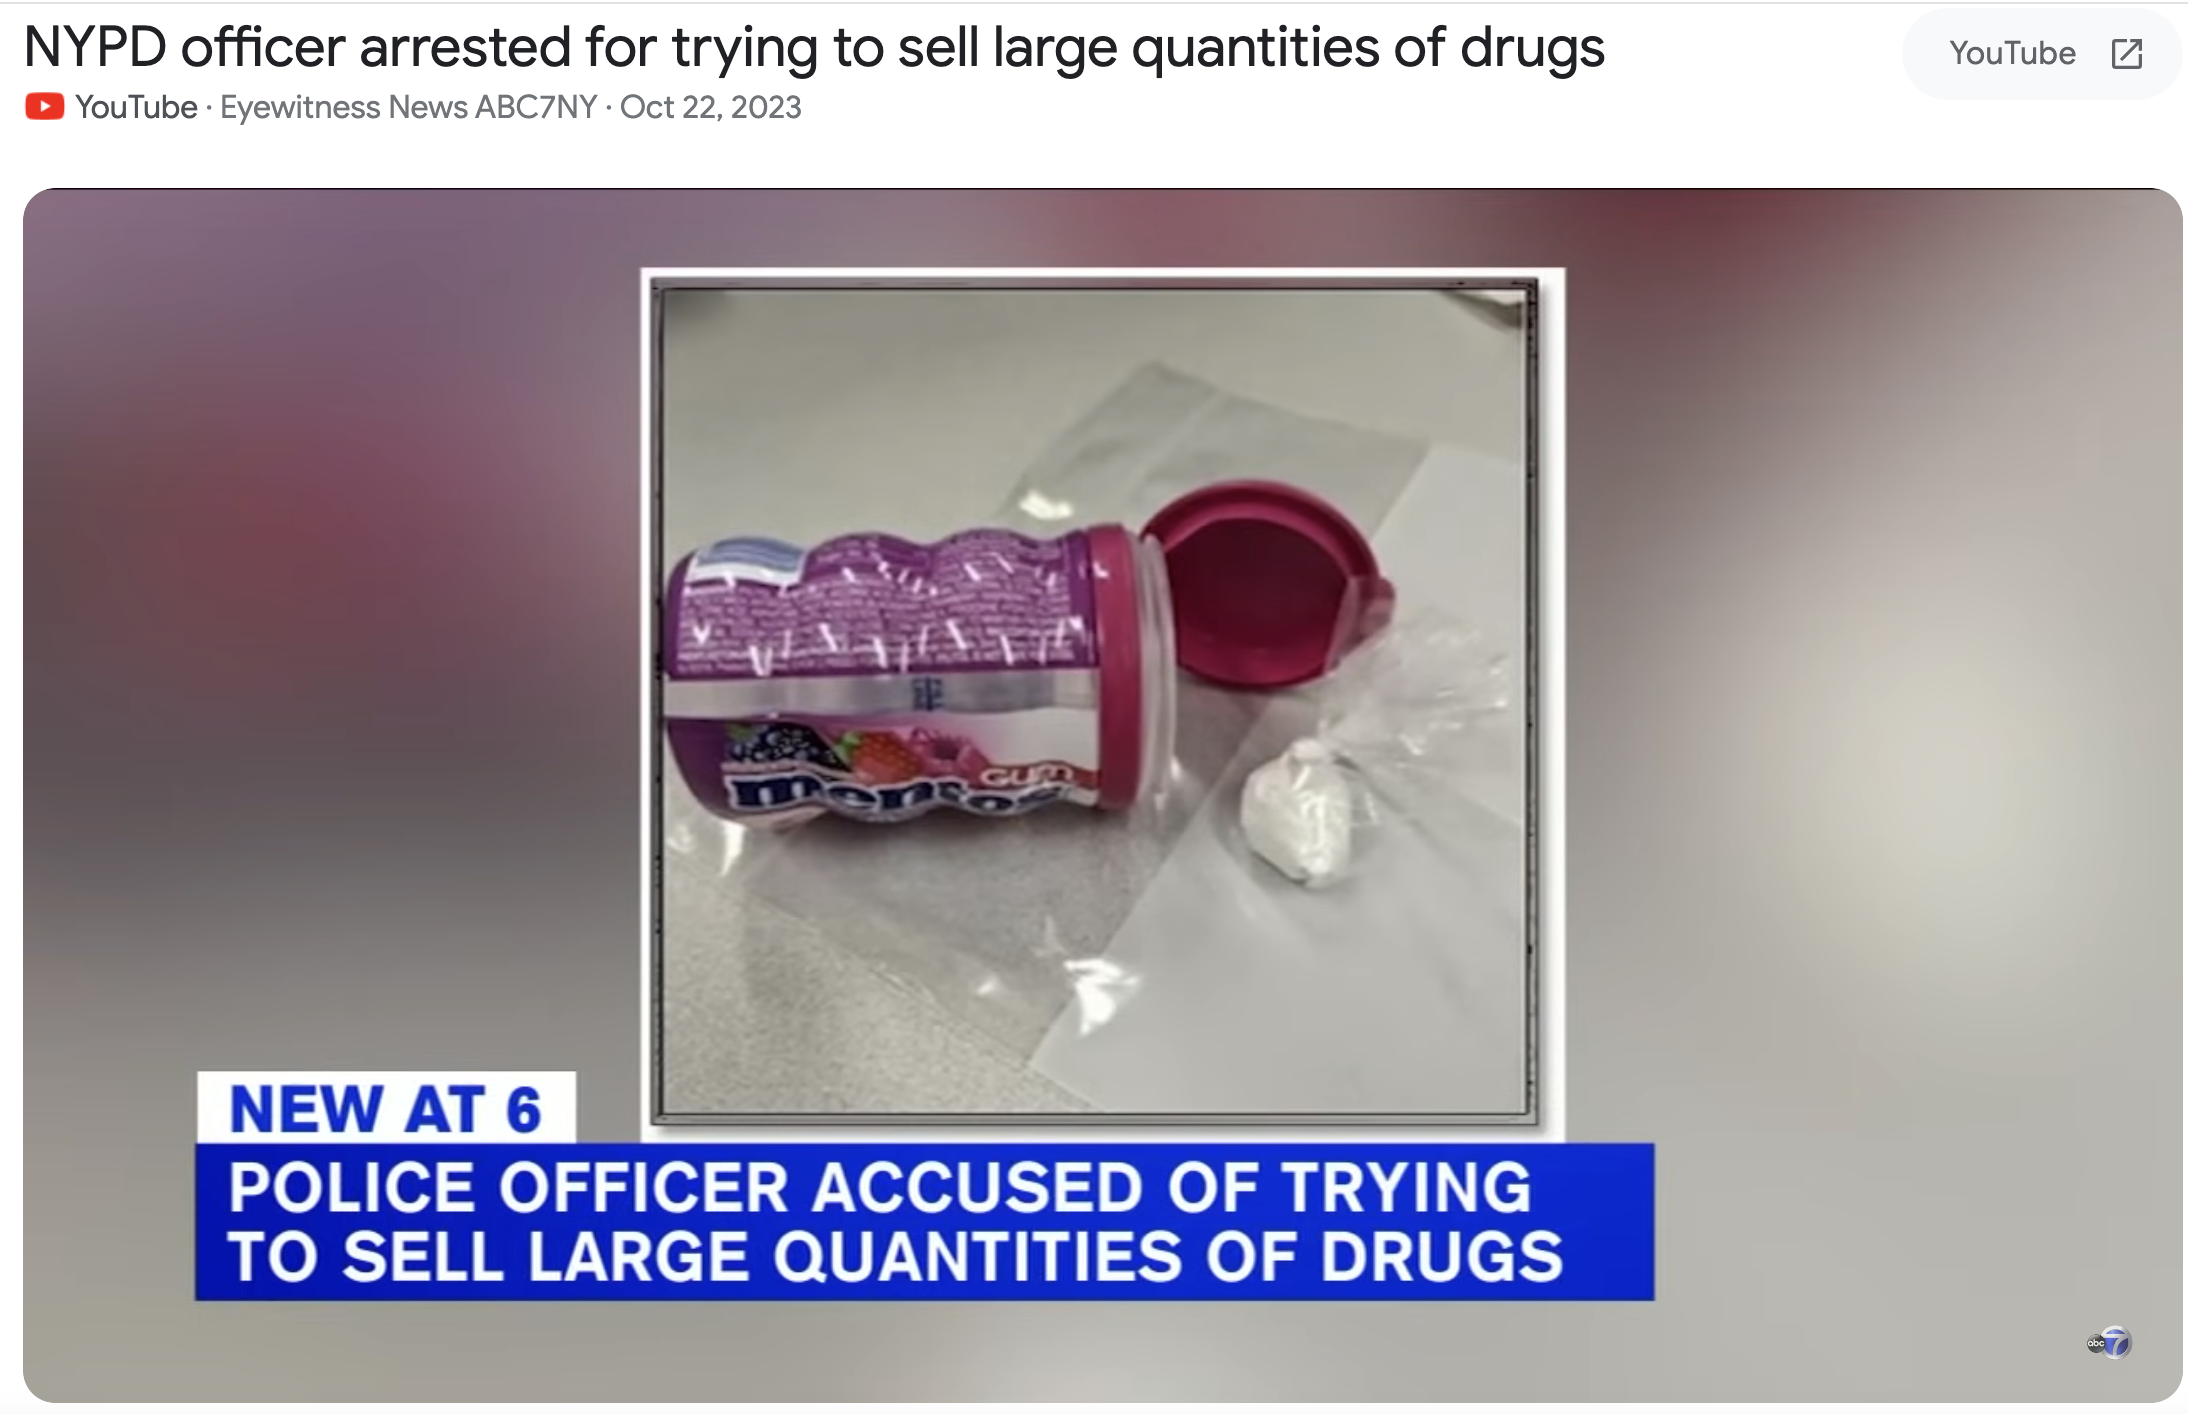 Nypd officer arrested for trying to sell large quantities of drugs YouTubeEyewitness News ABC7NY New At 6 Police Officer Accused Of Trying To Sell Large Quantities Of Drugs YouTube